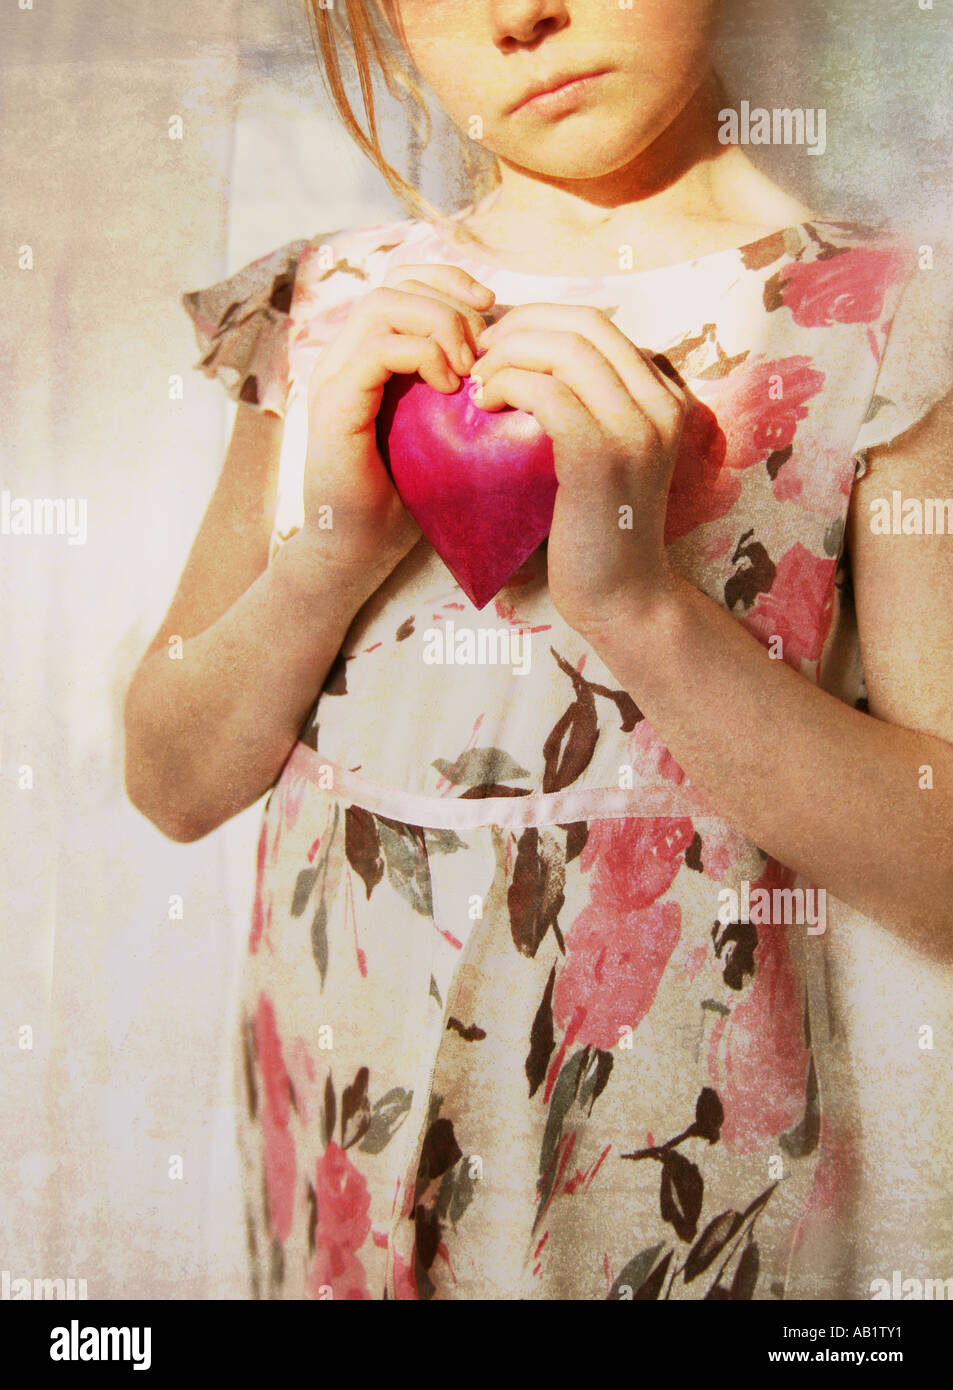 a girl holding a pink heart Stock Photo